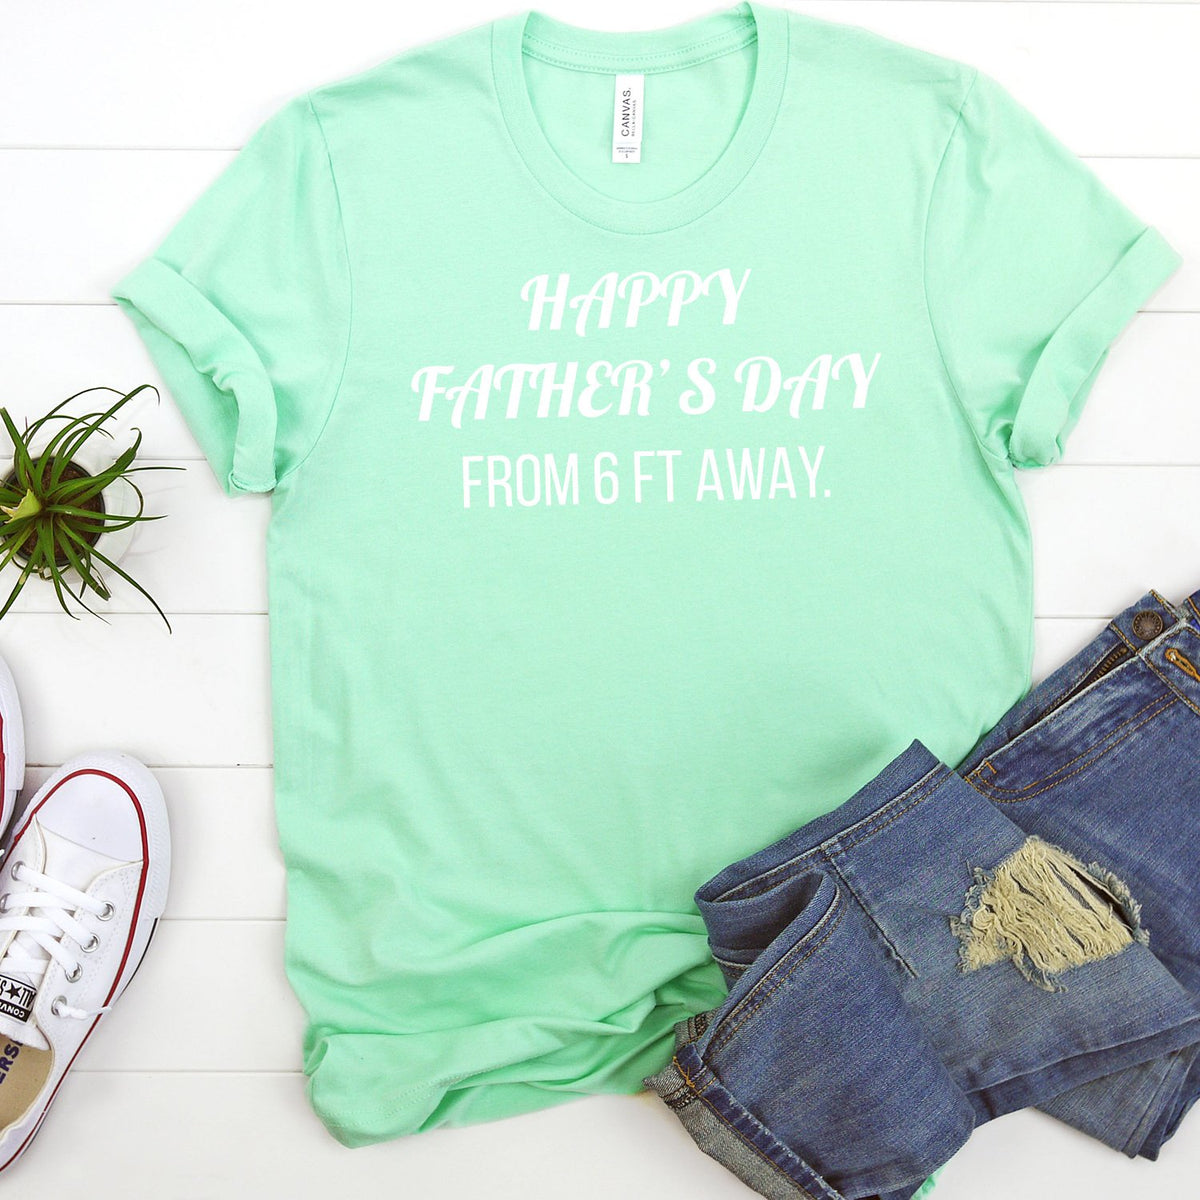 Happy Father&#39;s Day From 6 Ft Away - Short Sleeve Tee Shirt